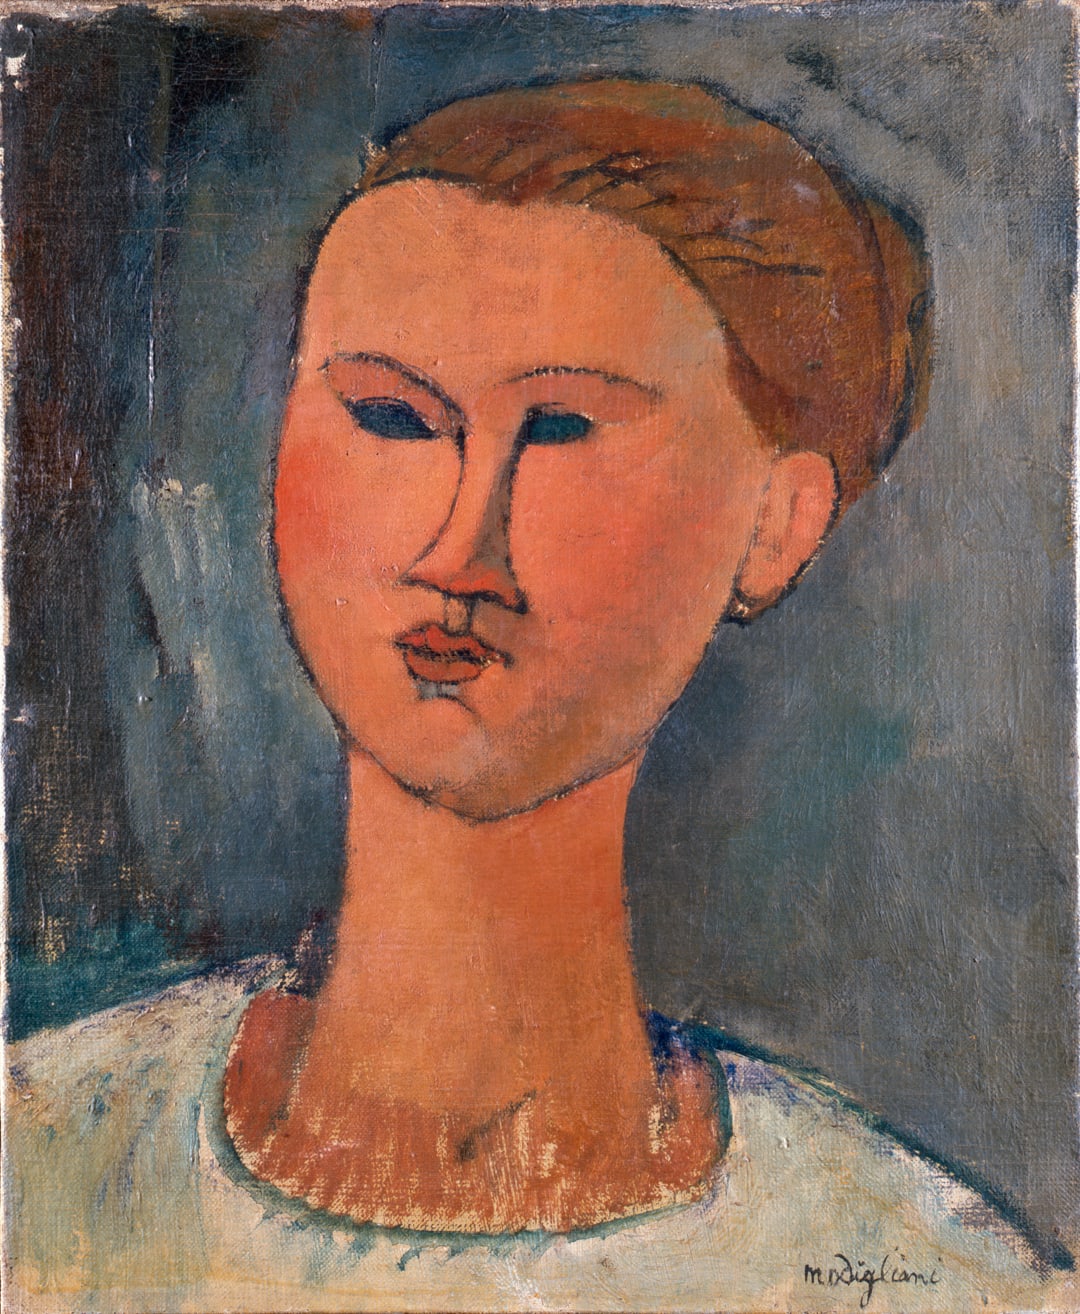 The Wick - Modigliani's Testa di Giovane Donna (Head of a Young Lady), Conceived in 1915, digitised in 2021
DAW® (Digital Artwork)